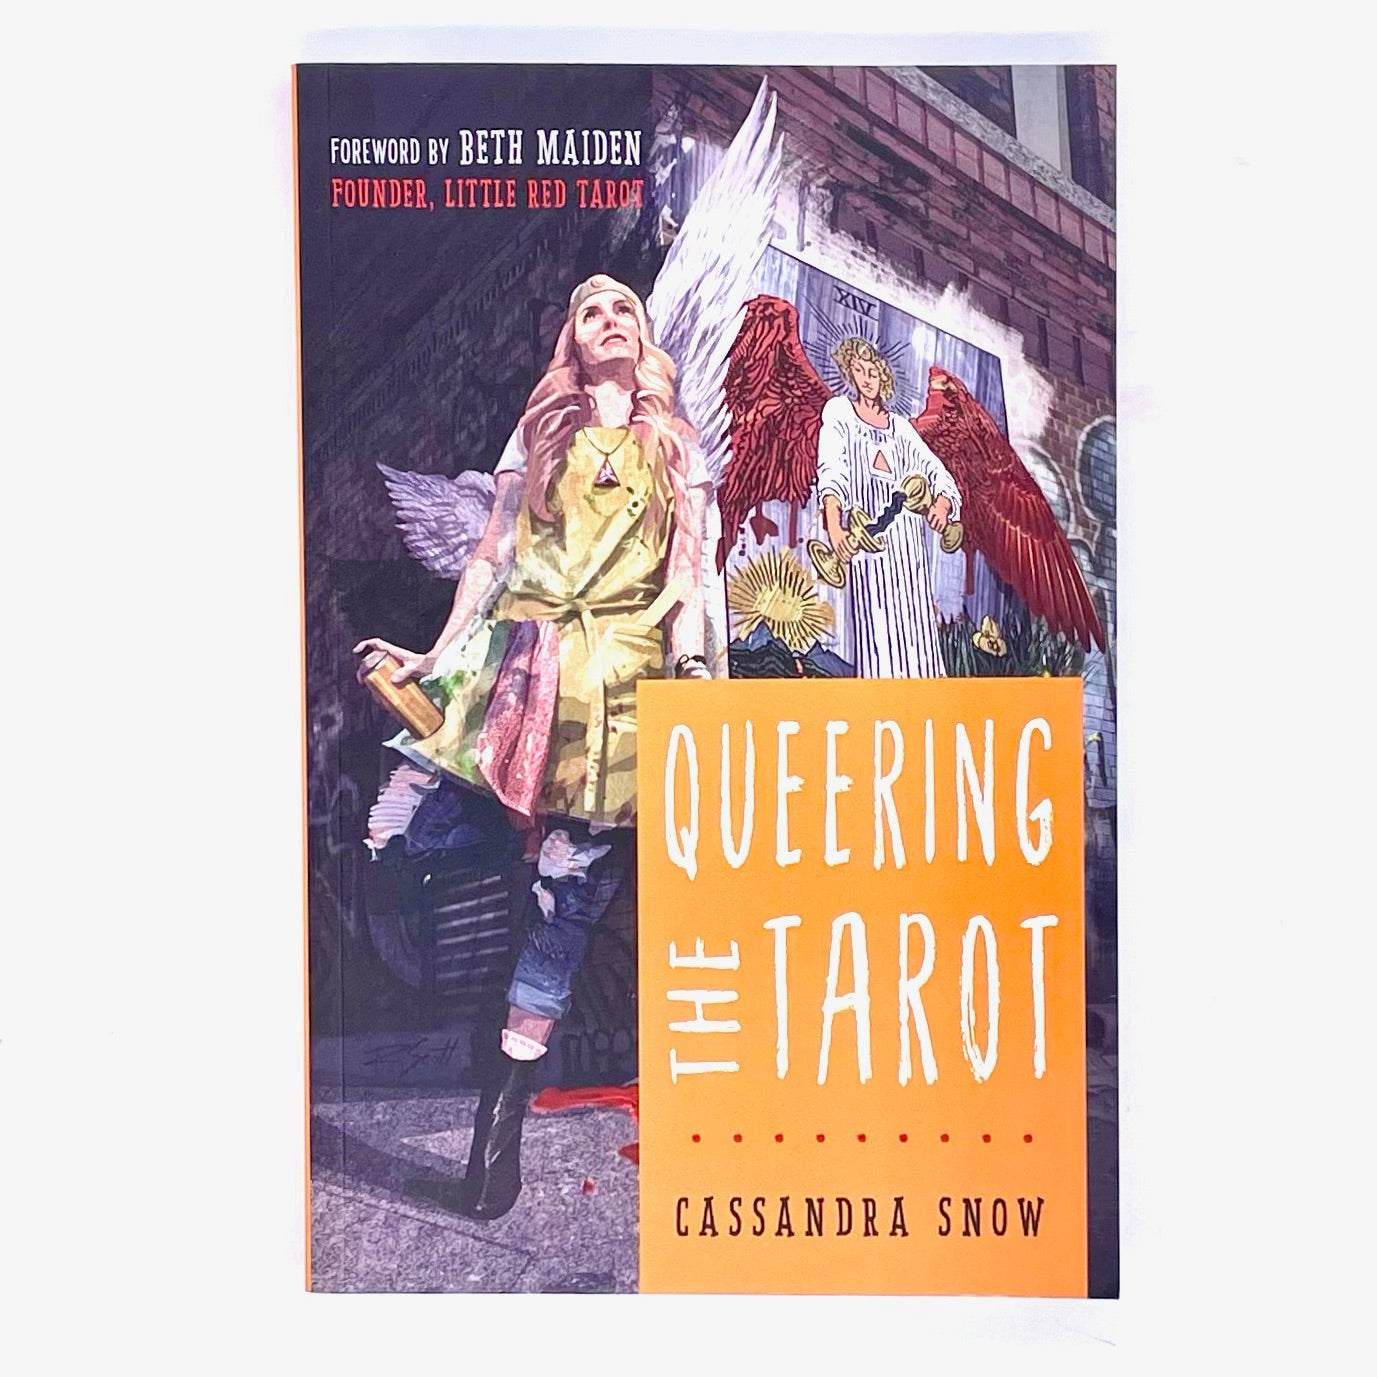 Book cover of Queering the Tarot by Cassandra Snow.